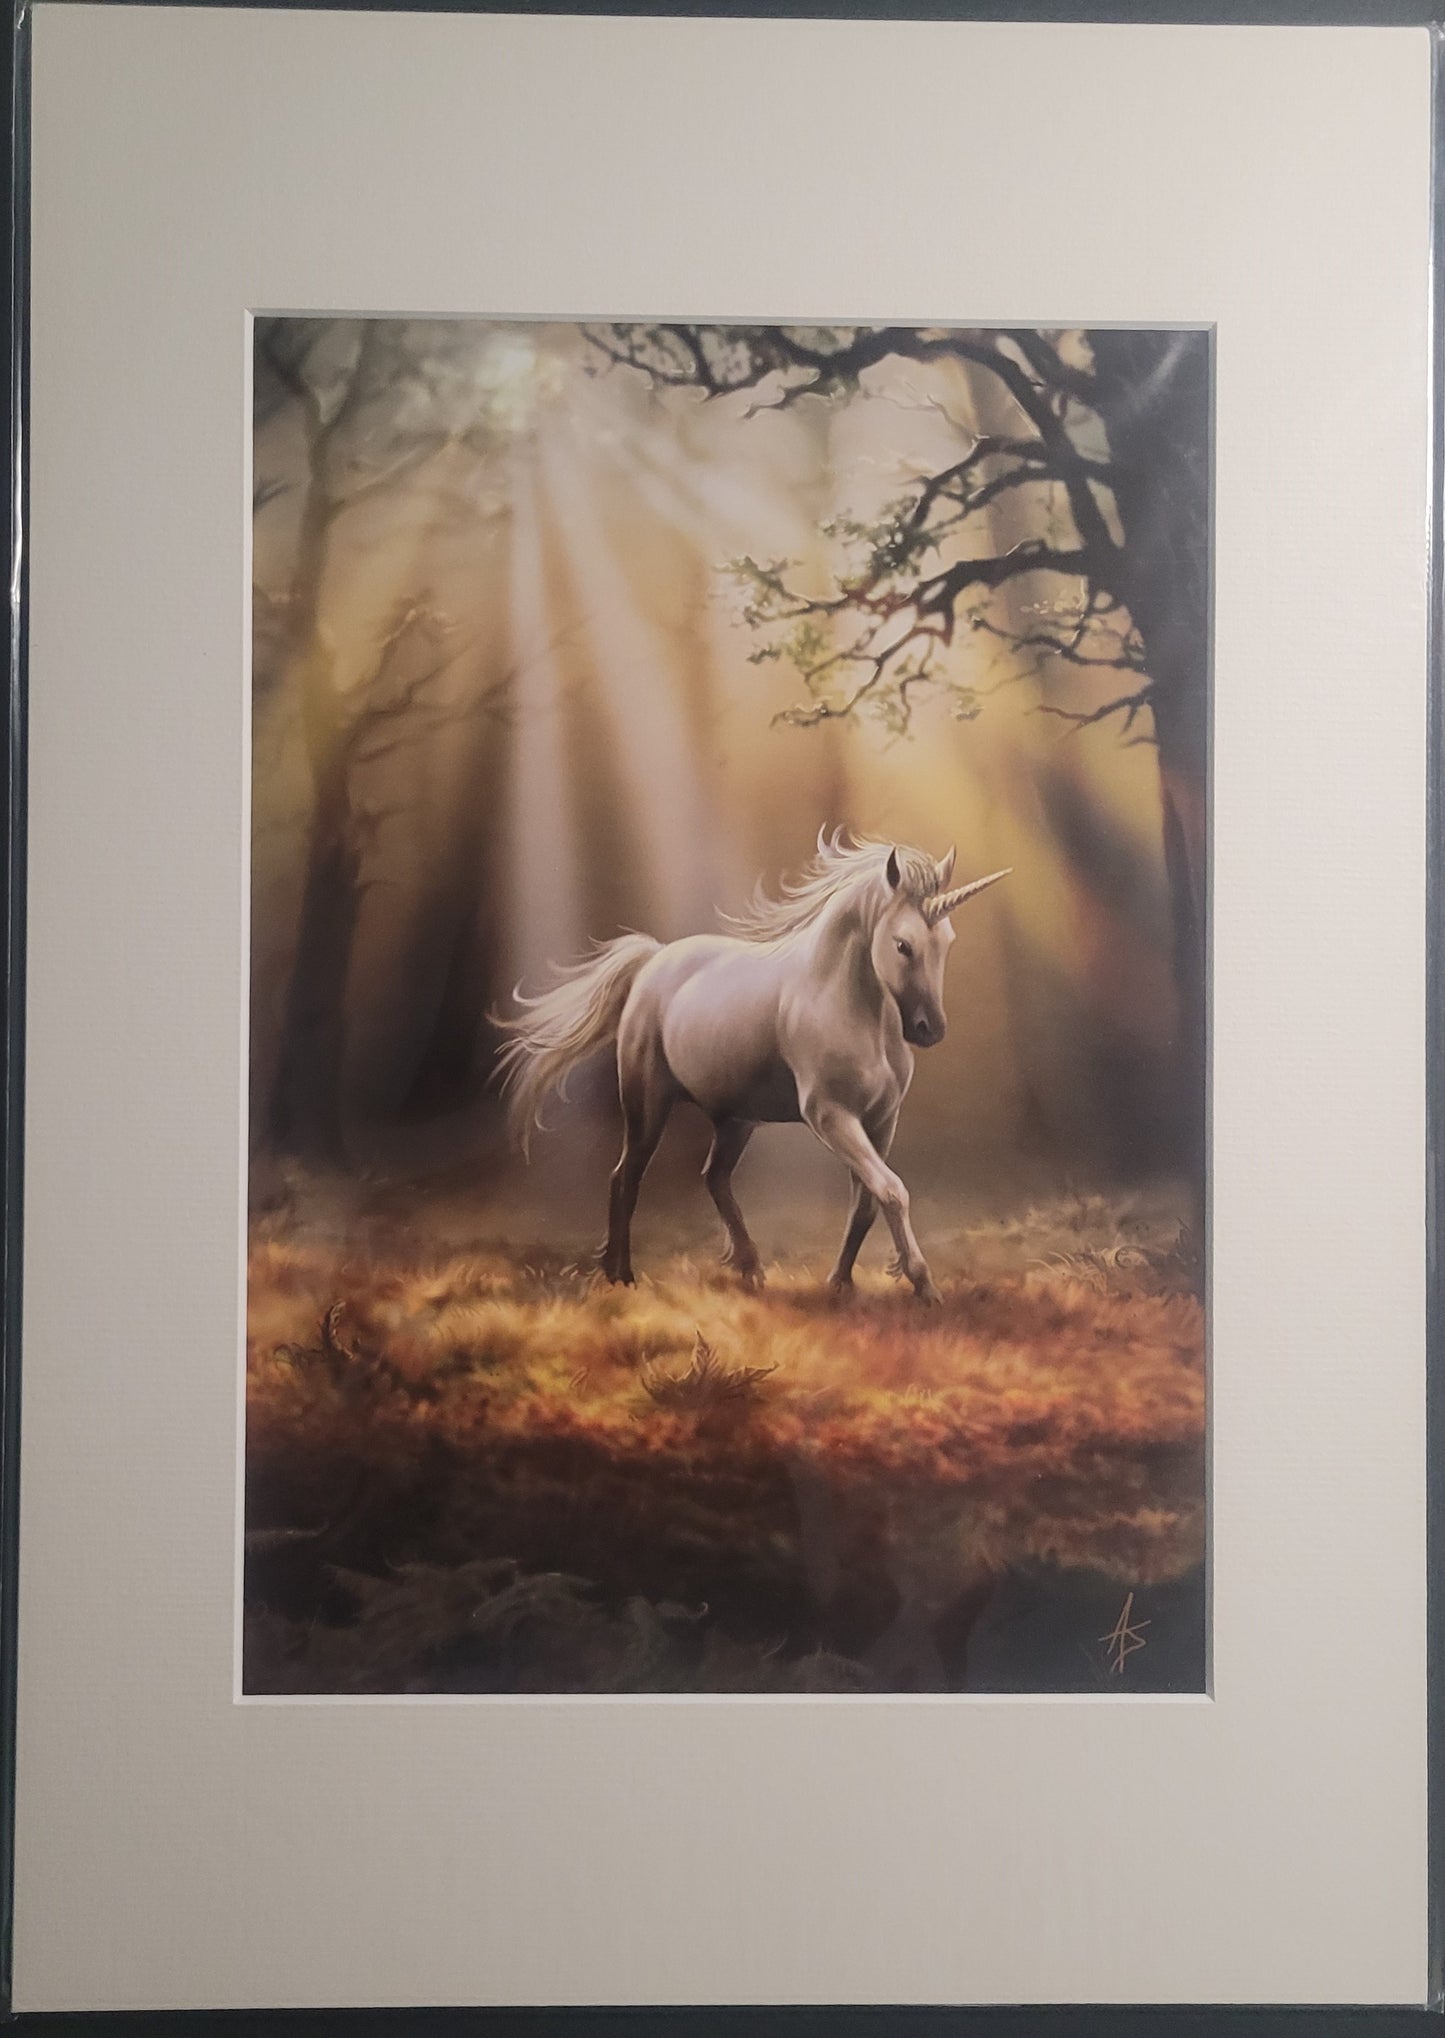 Glimpse of a Unicorn by Anne Stokes, Mounted Print